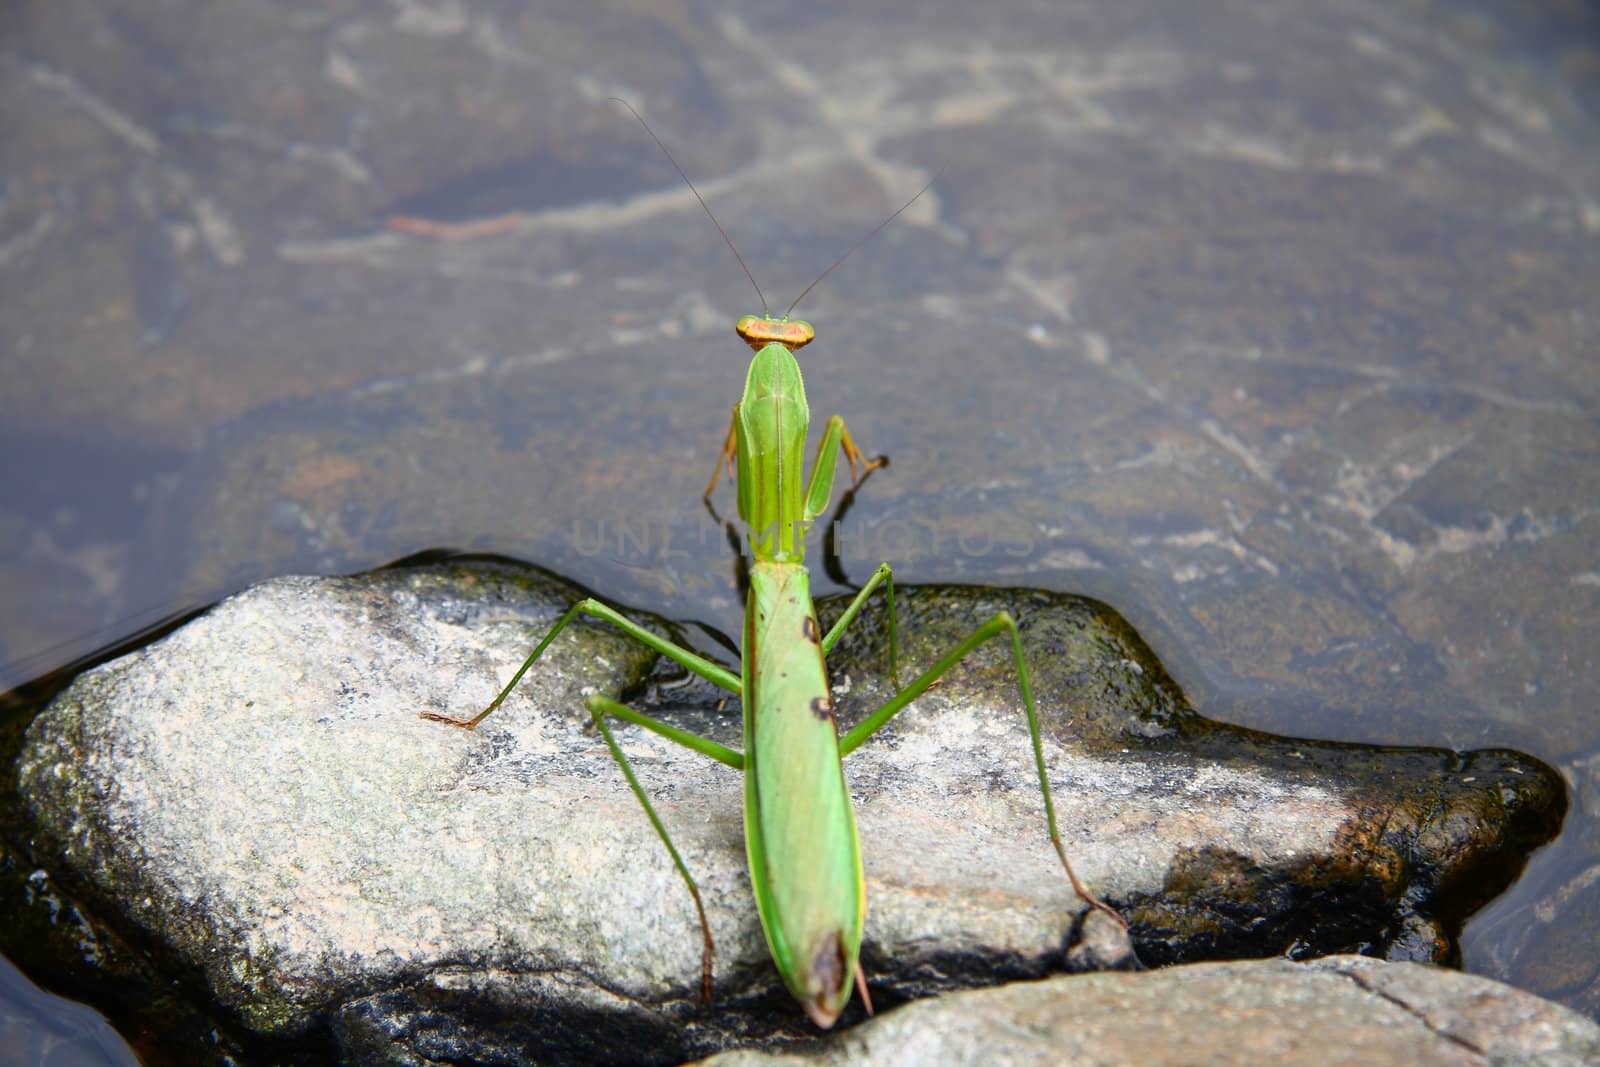 A mantis climbing in drinking water beside streams